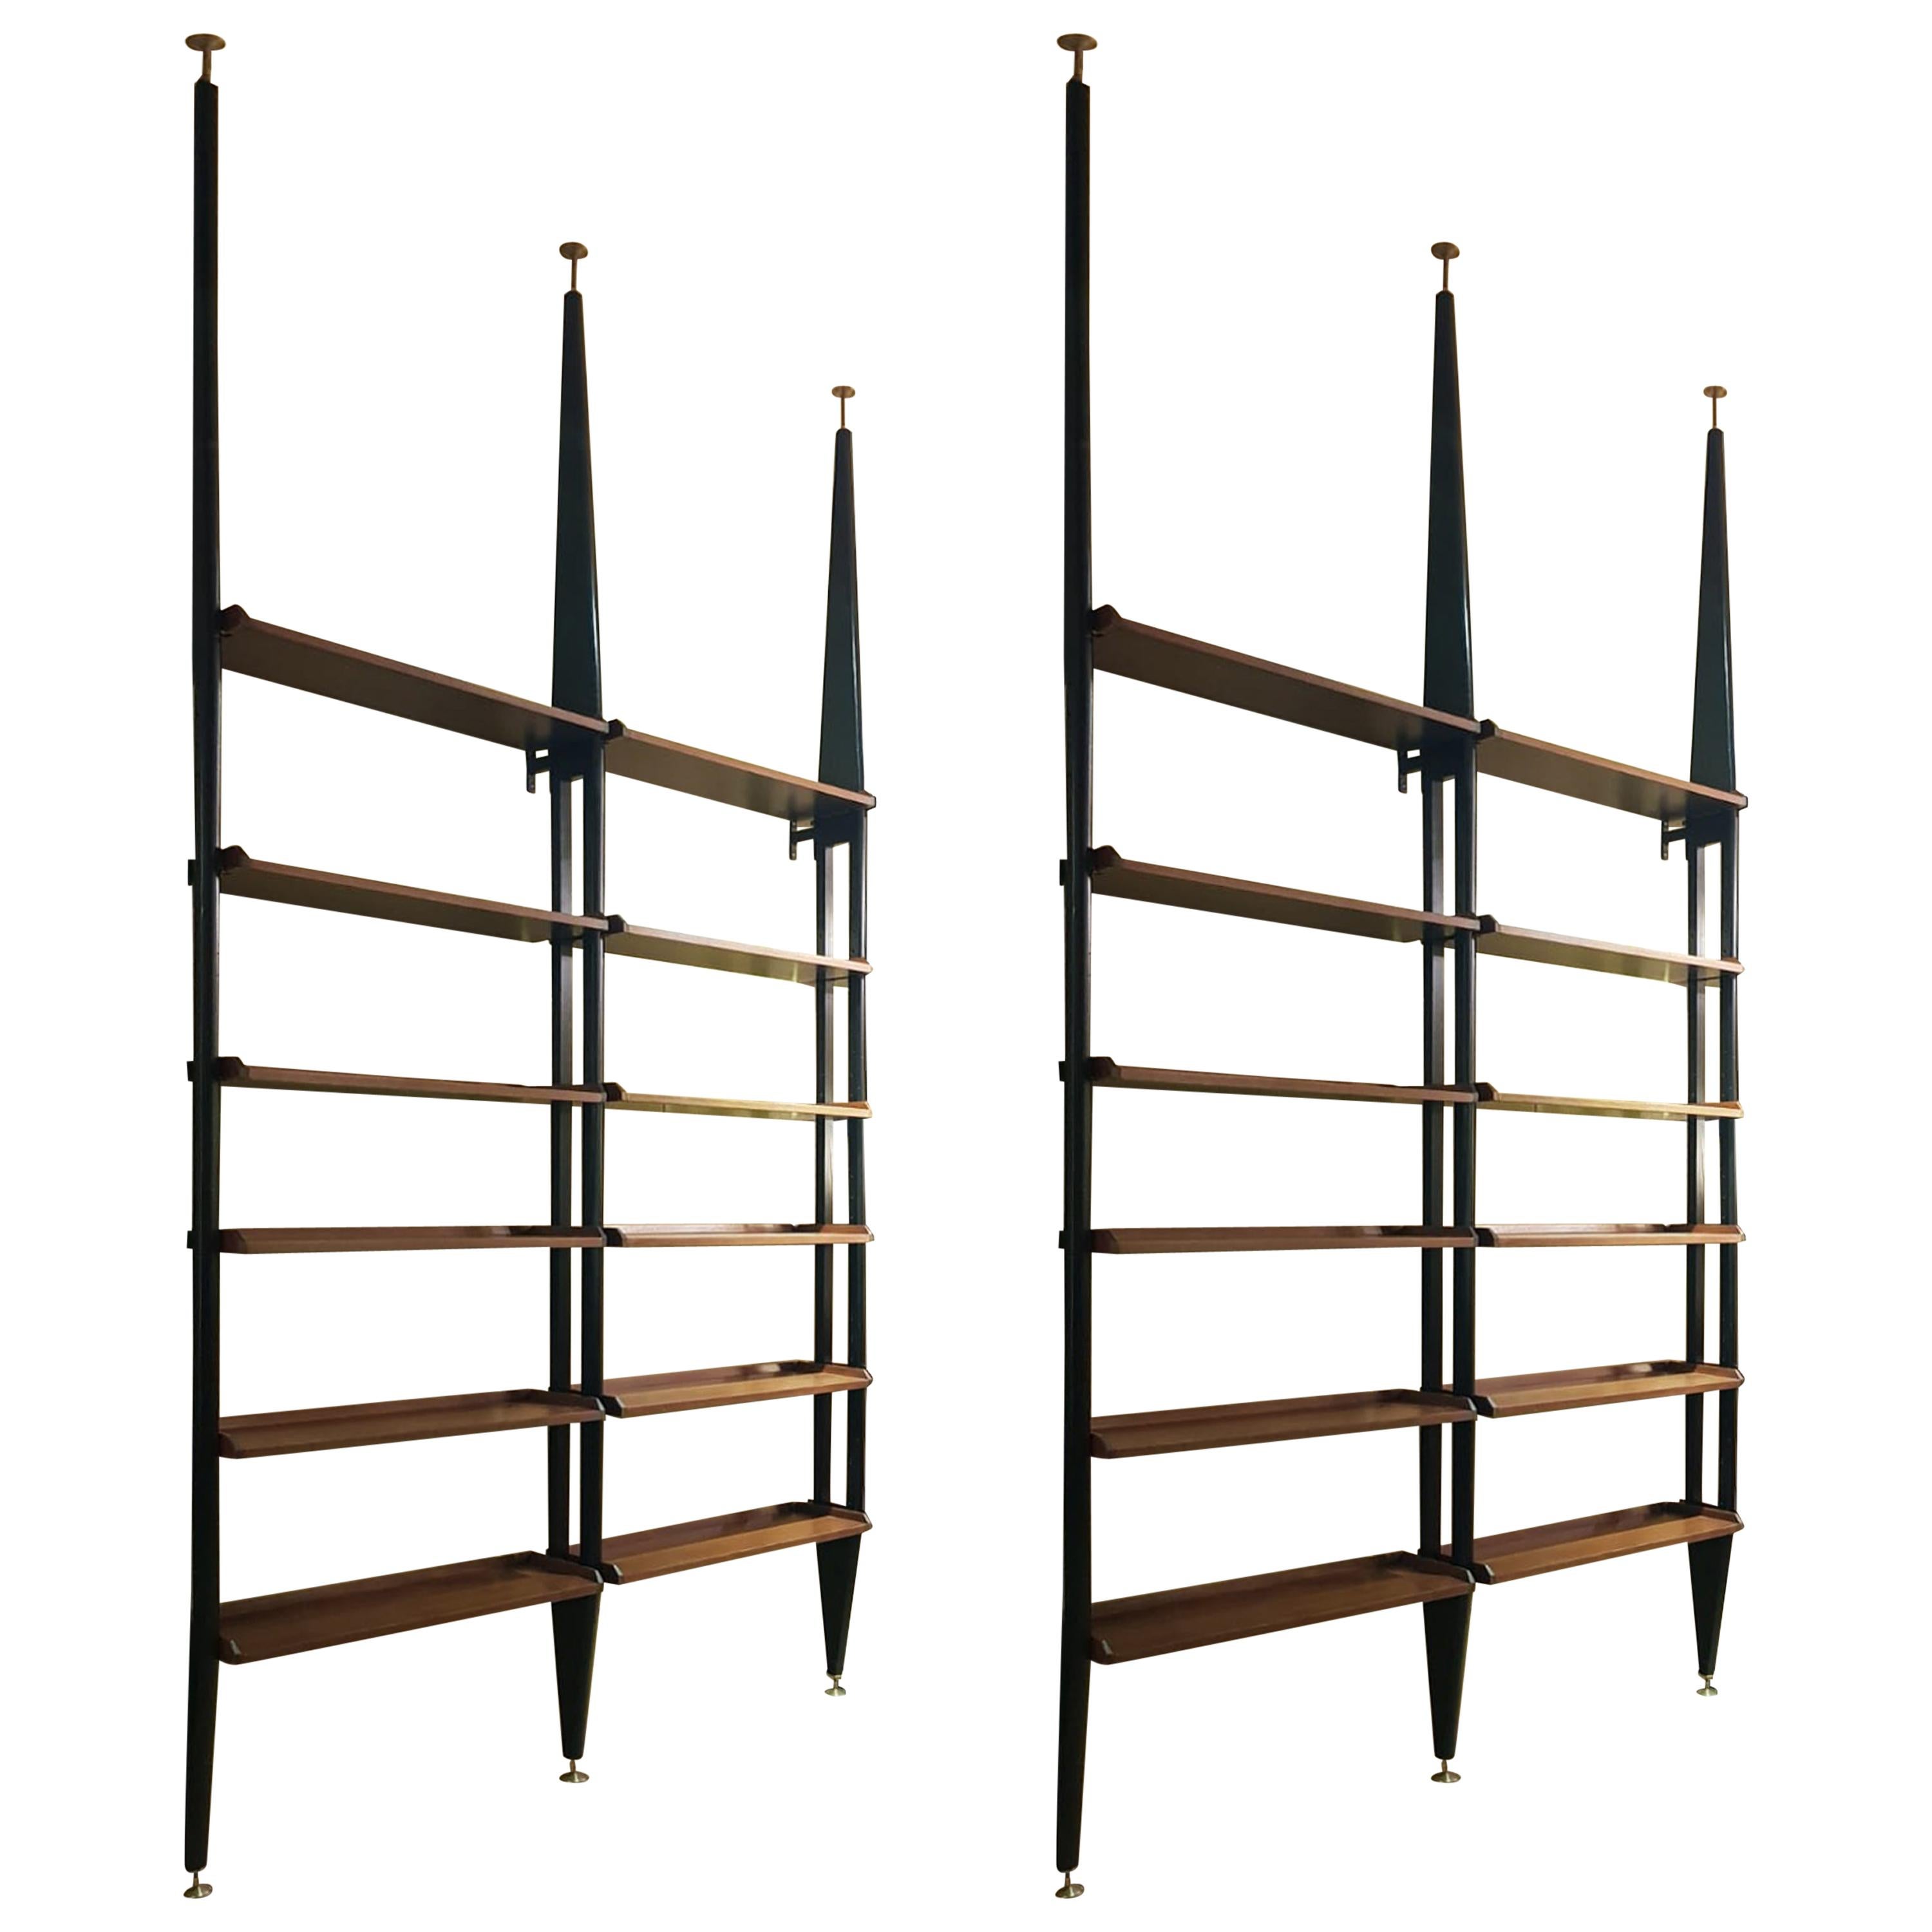 Two Mahogany Wood Adjustable Shelves Black Metal Uprights Bookcases, Italy 1950s